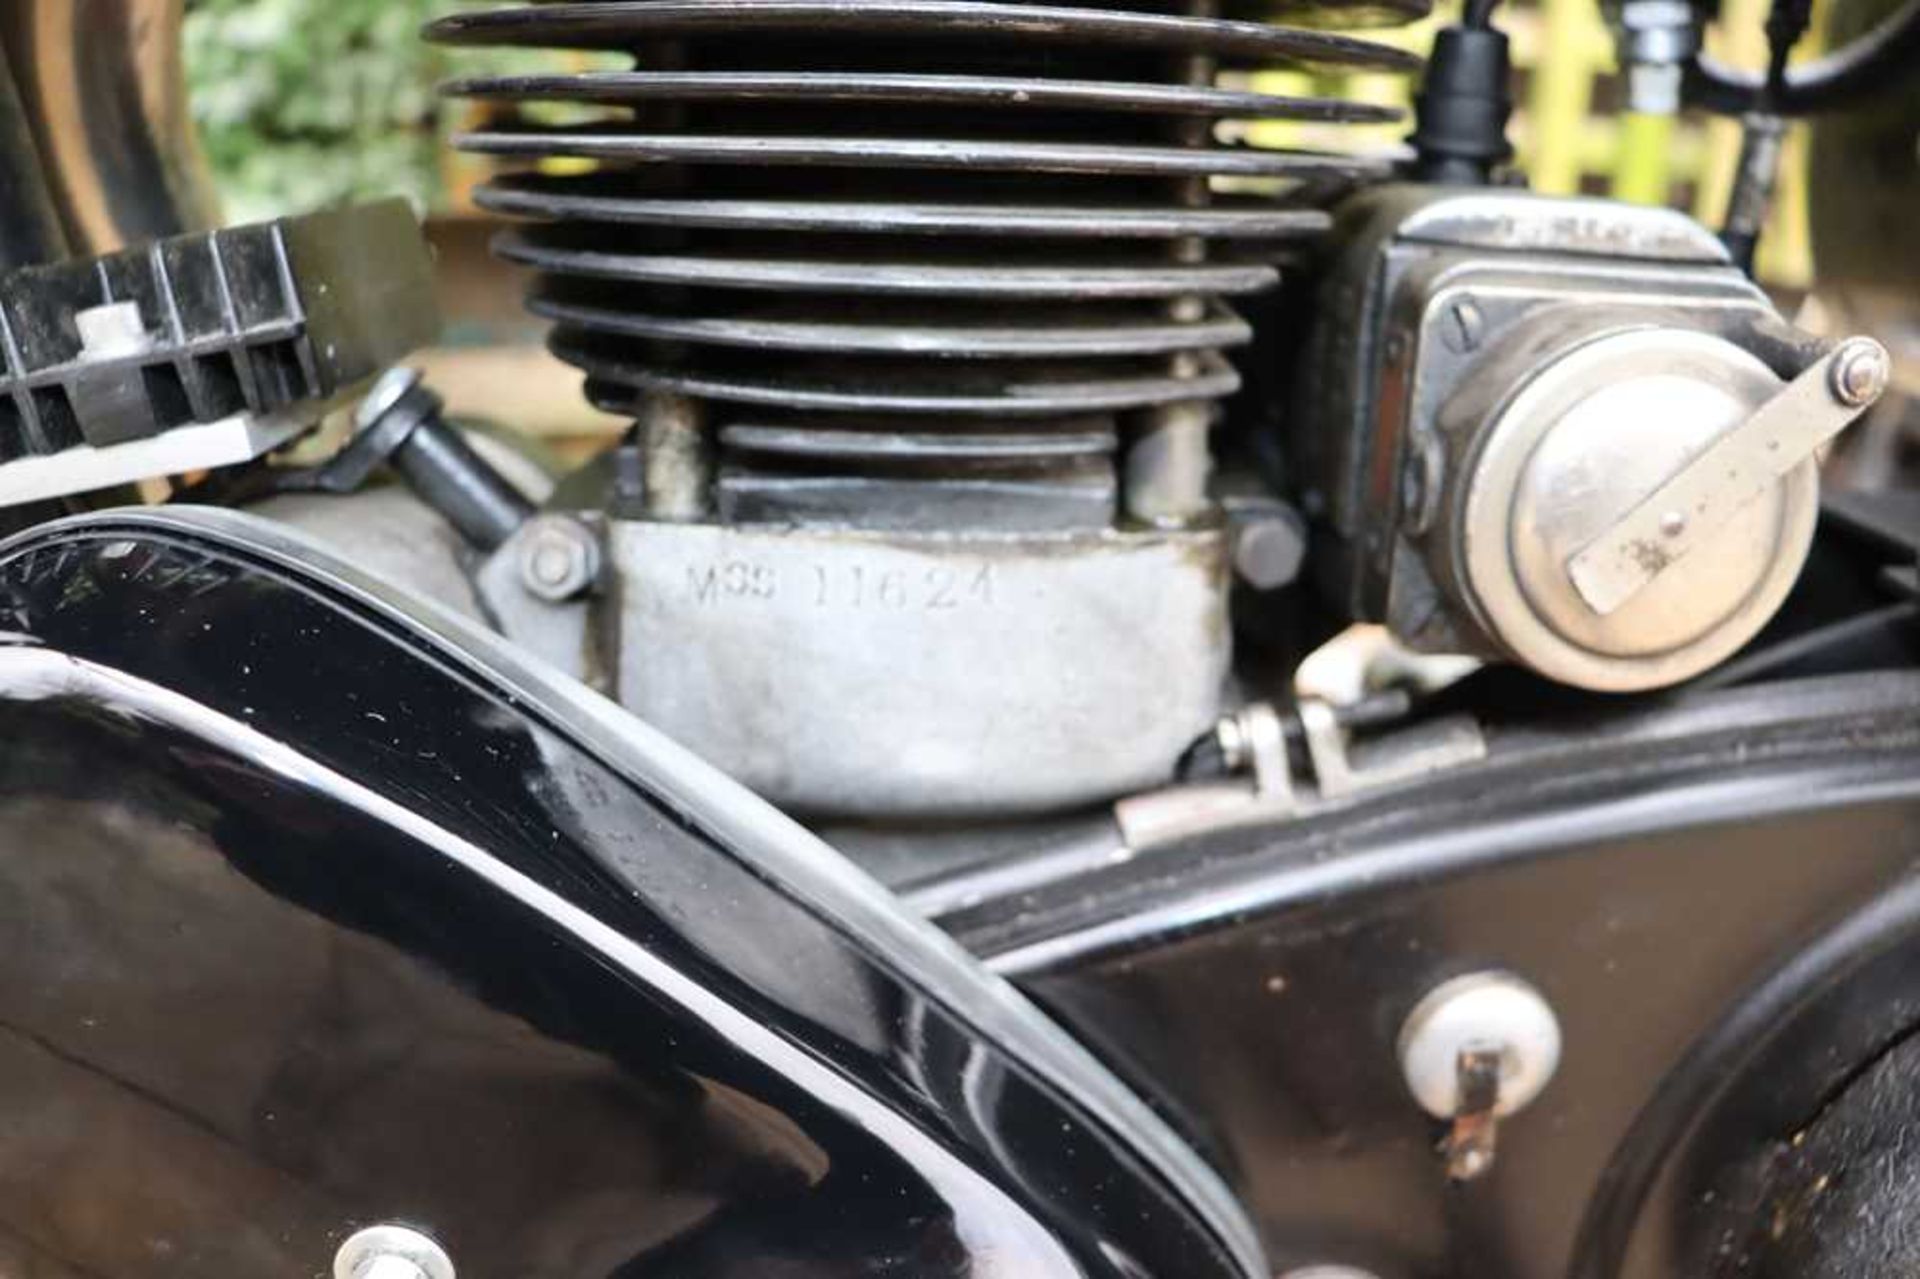 1954 Velocette MSS Fitted with an Alton electric starter kit - Image 33 of 41